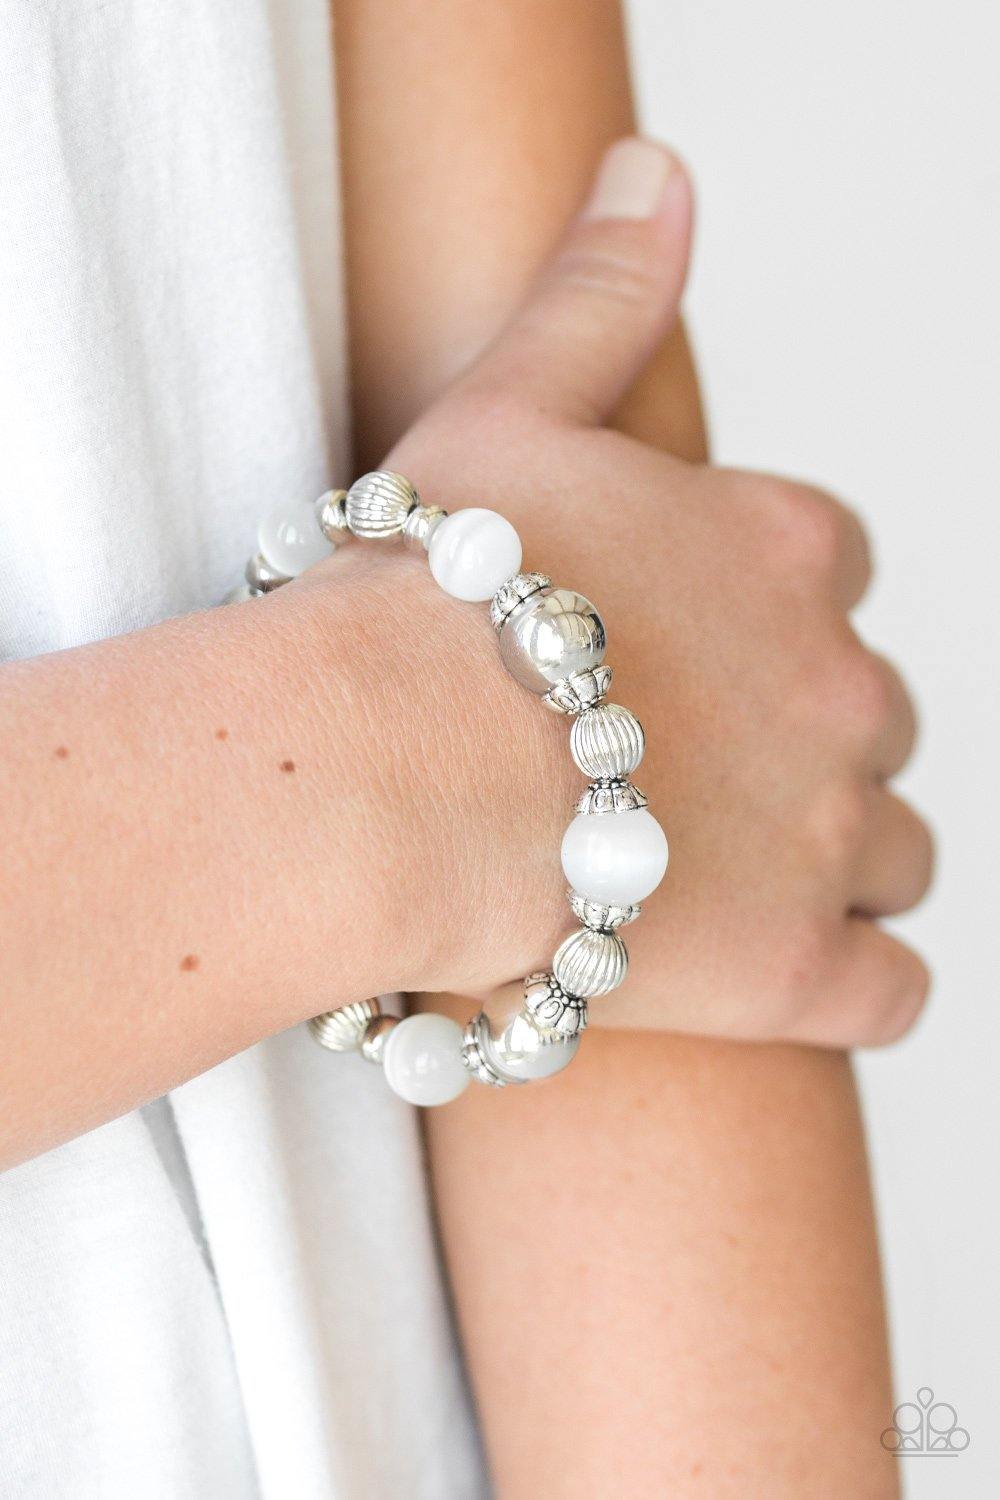 Paparazzi Accessories Once Upon A MARITIME White Bracelet